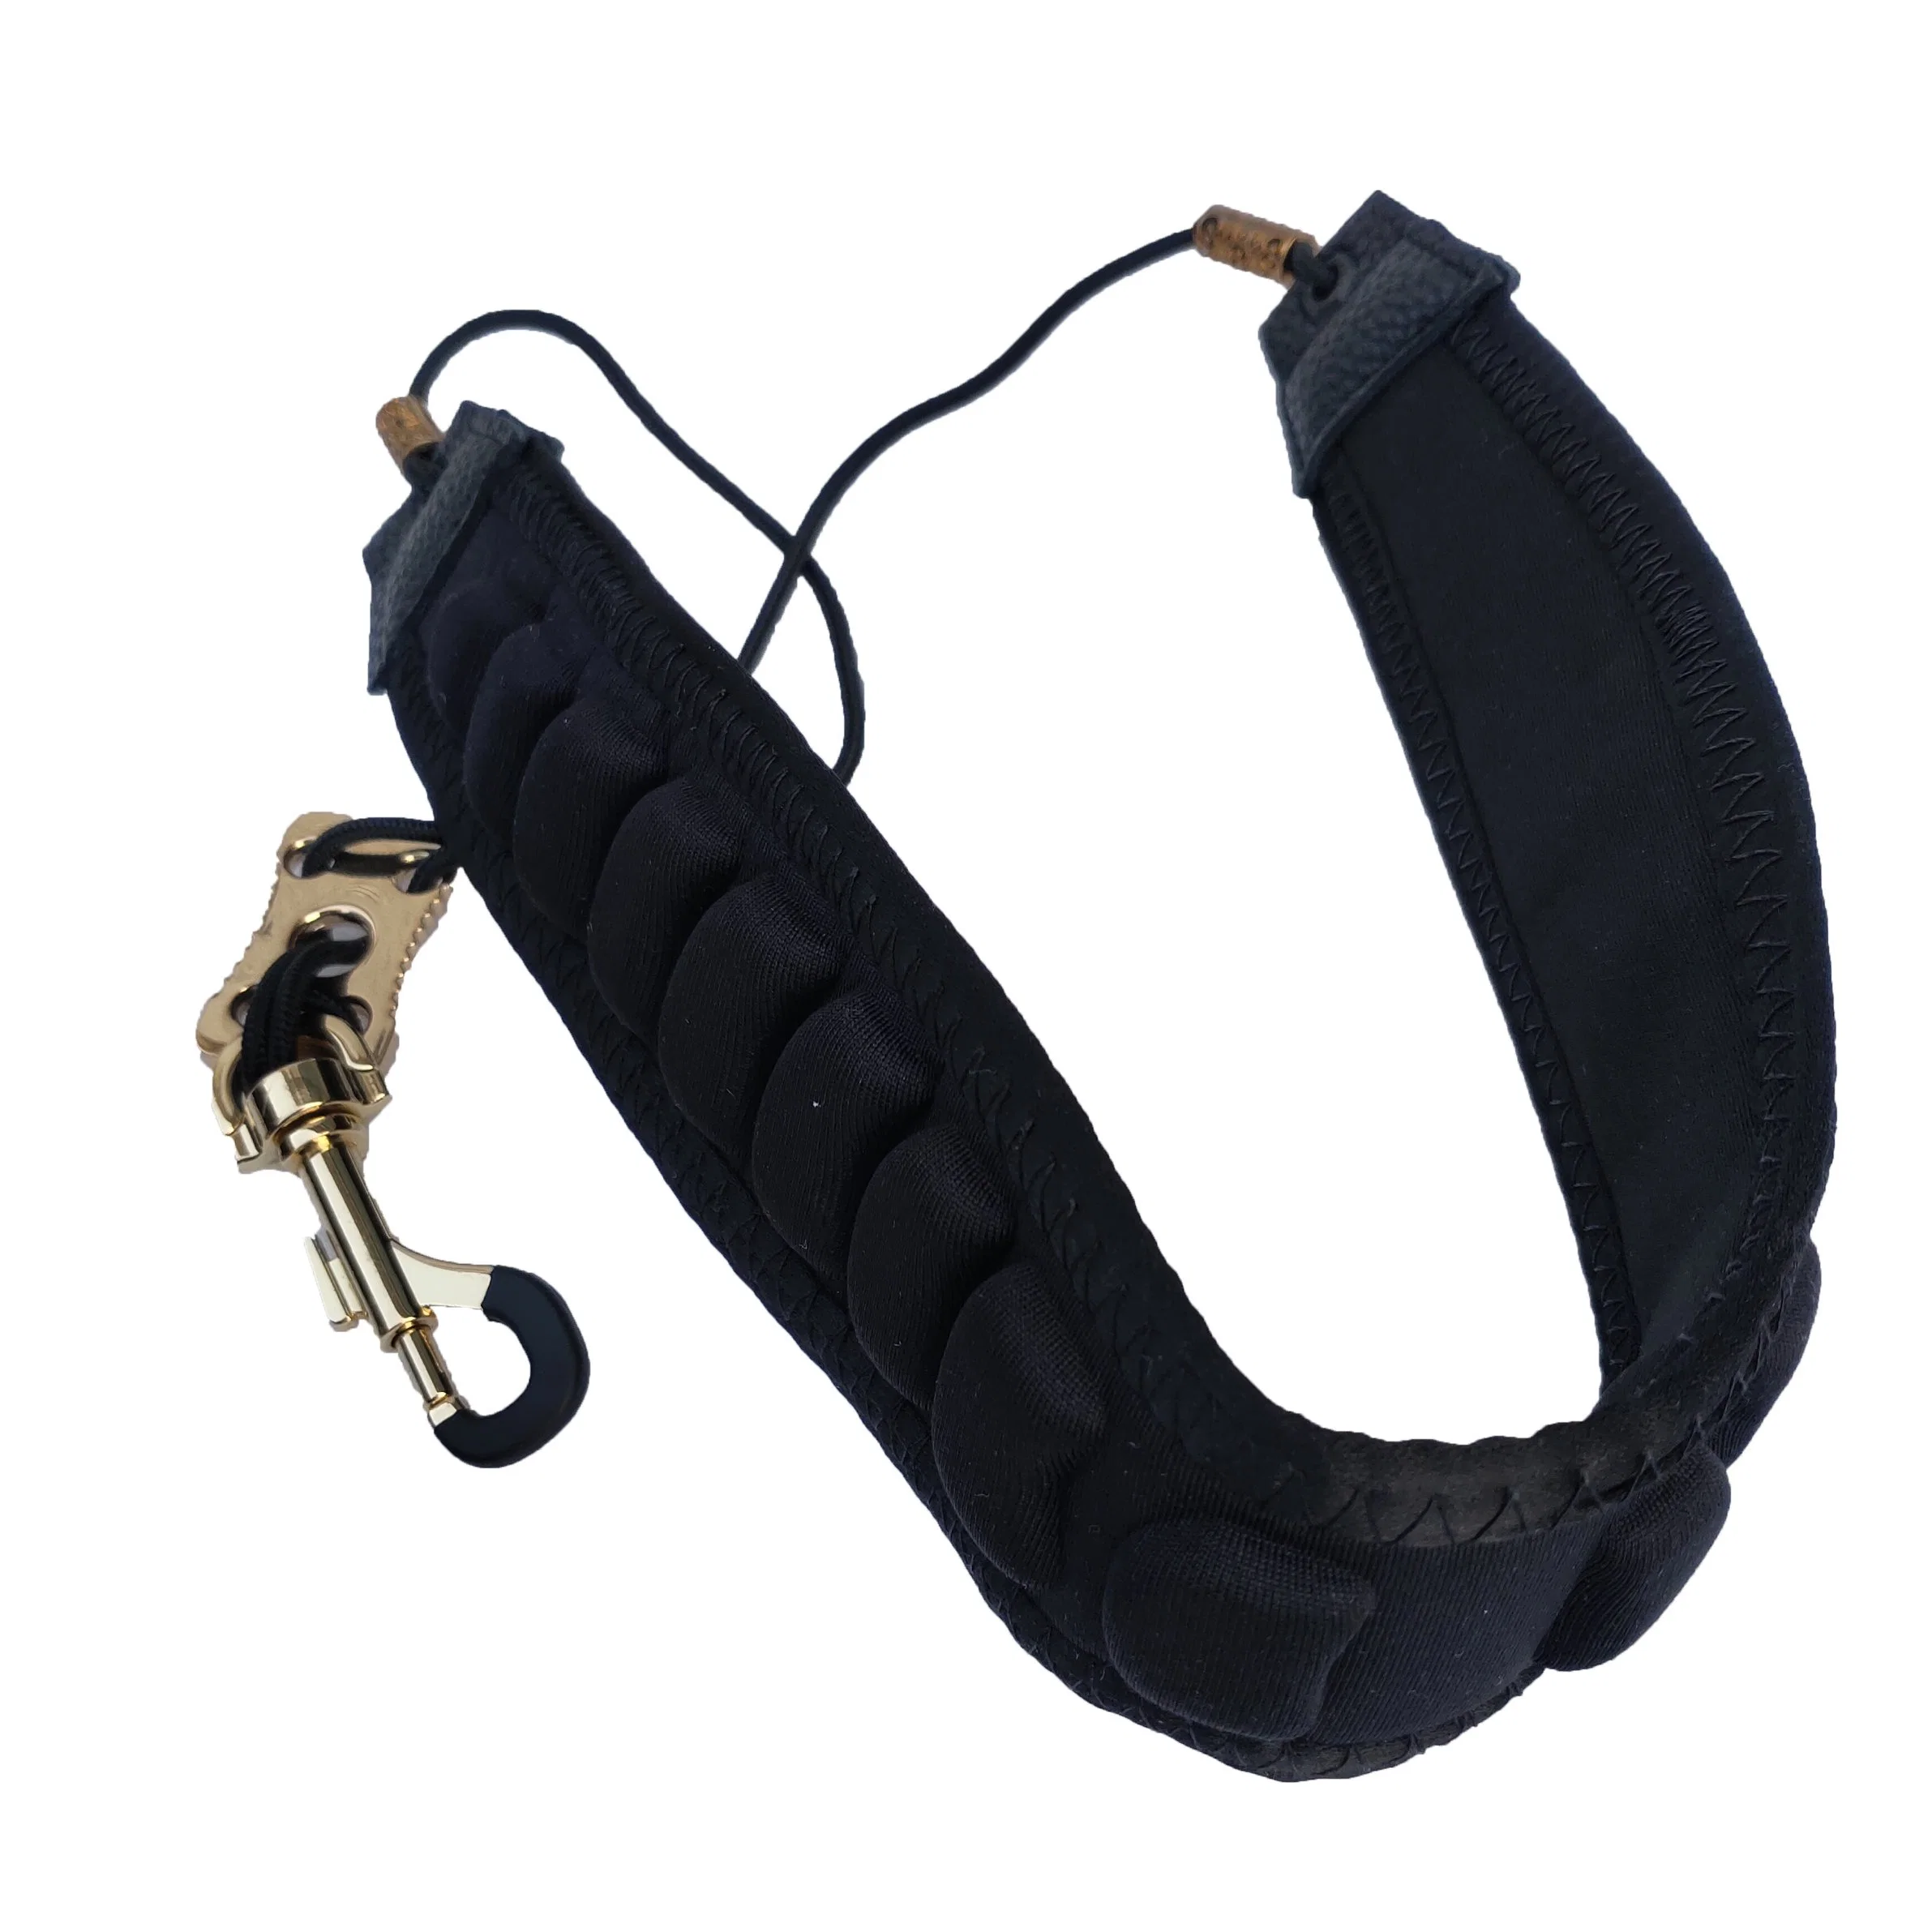 Wholesale Accessories for Sax, Leather Straps